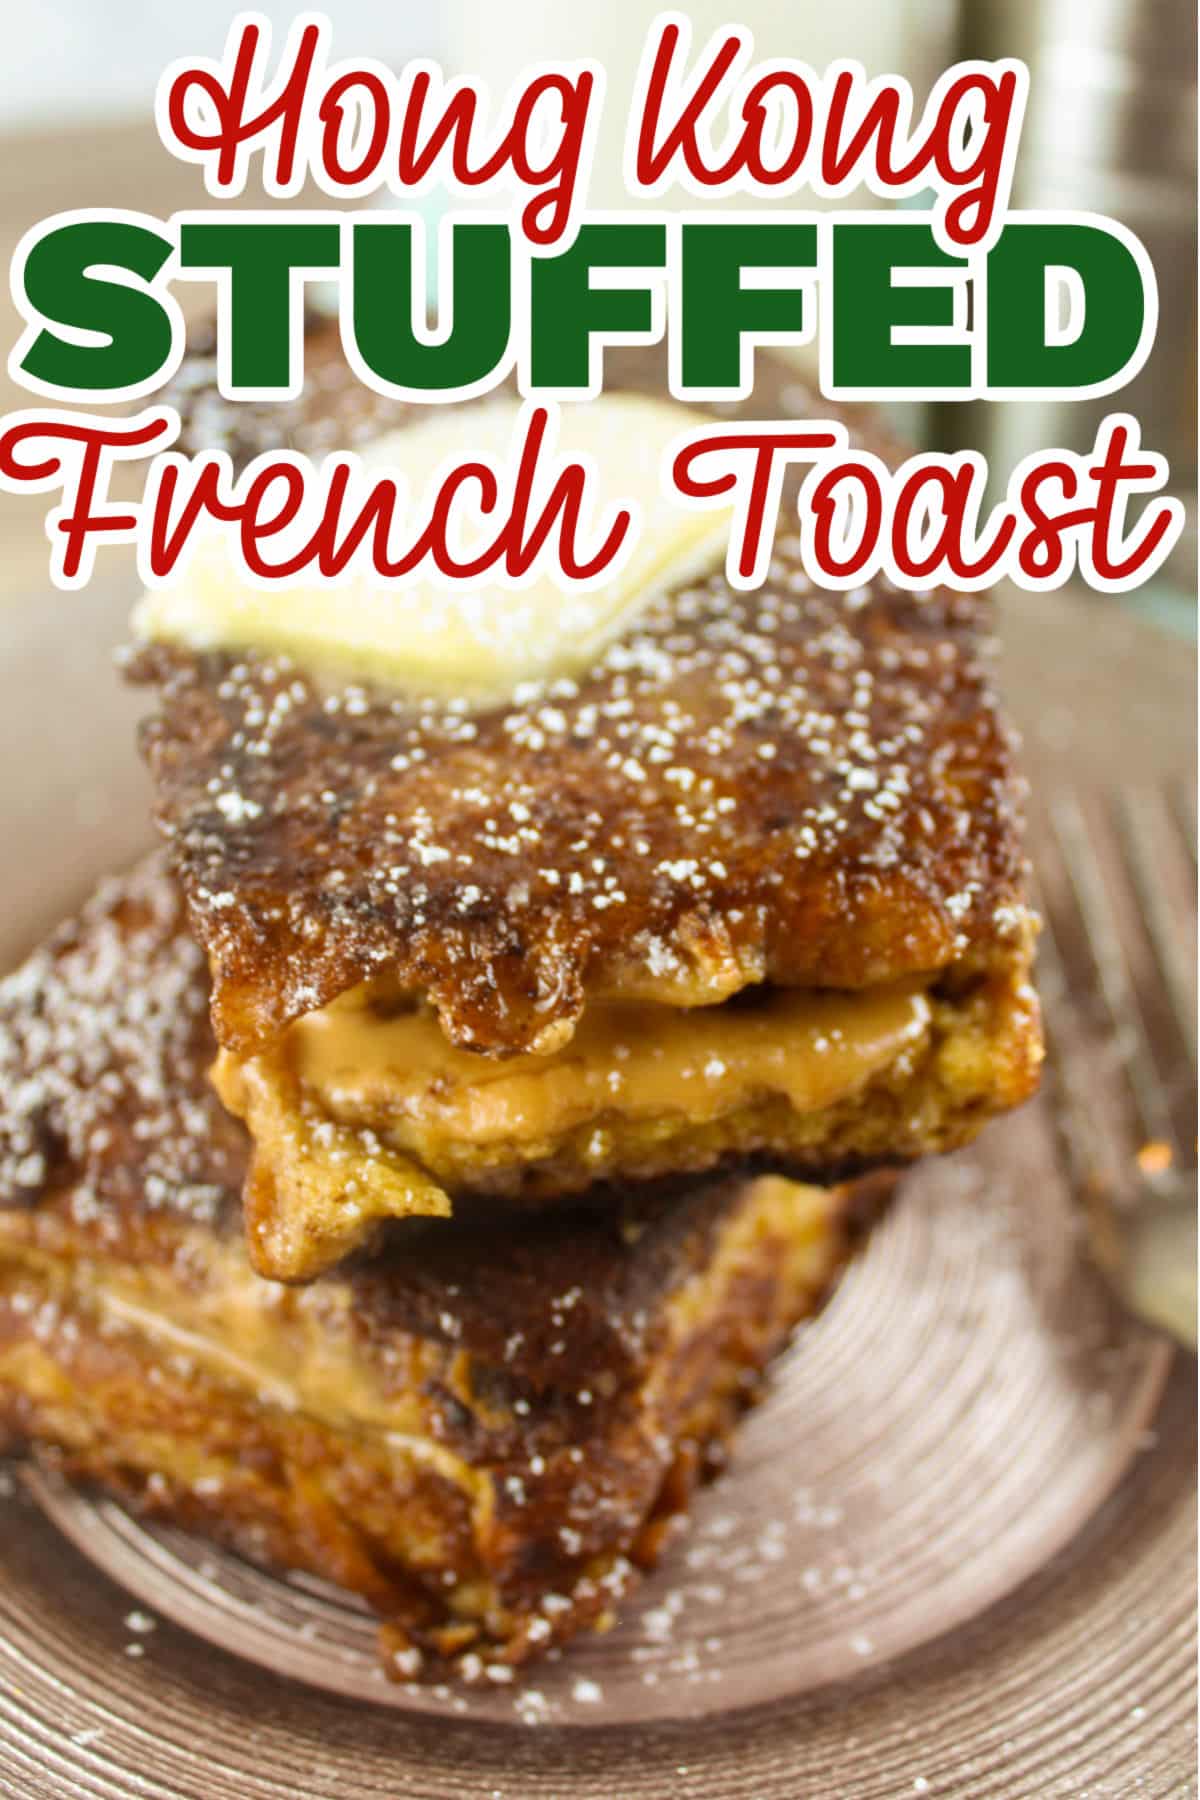 Hong Kong French Toast will definitely surprise you! It's thick-cut brioche bread schmeared with peanut butter to make sandwiches and then fried on all sides. OMG - it is HEAVENLY! I wasn't sure about it until the first bite - then I couldn't stop eating it! via @foodhussy